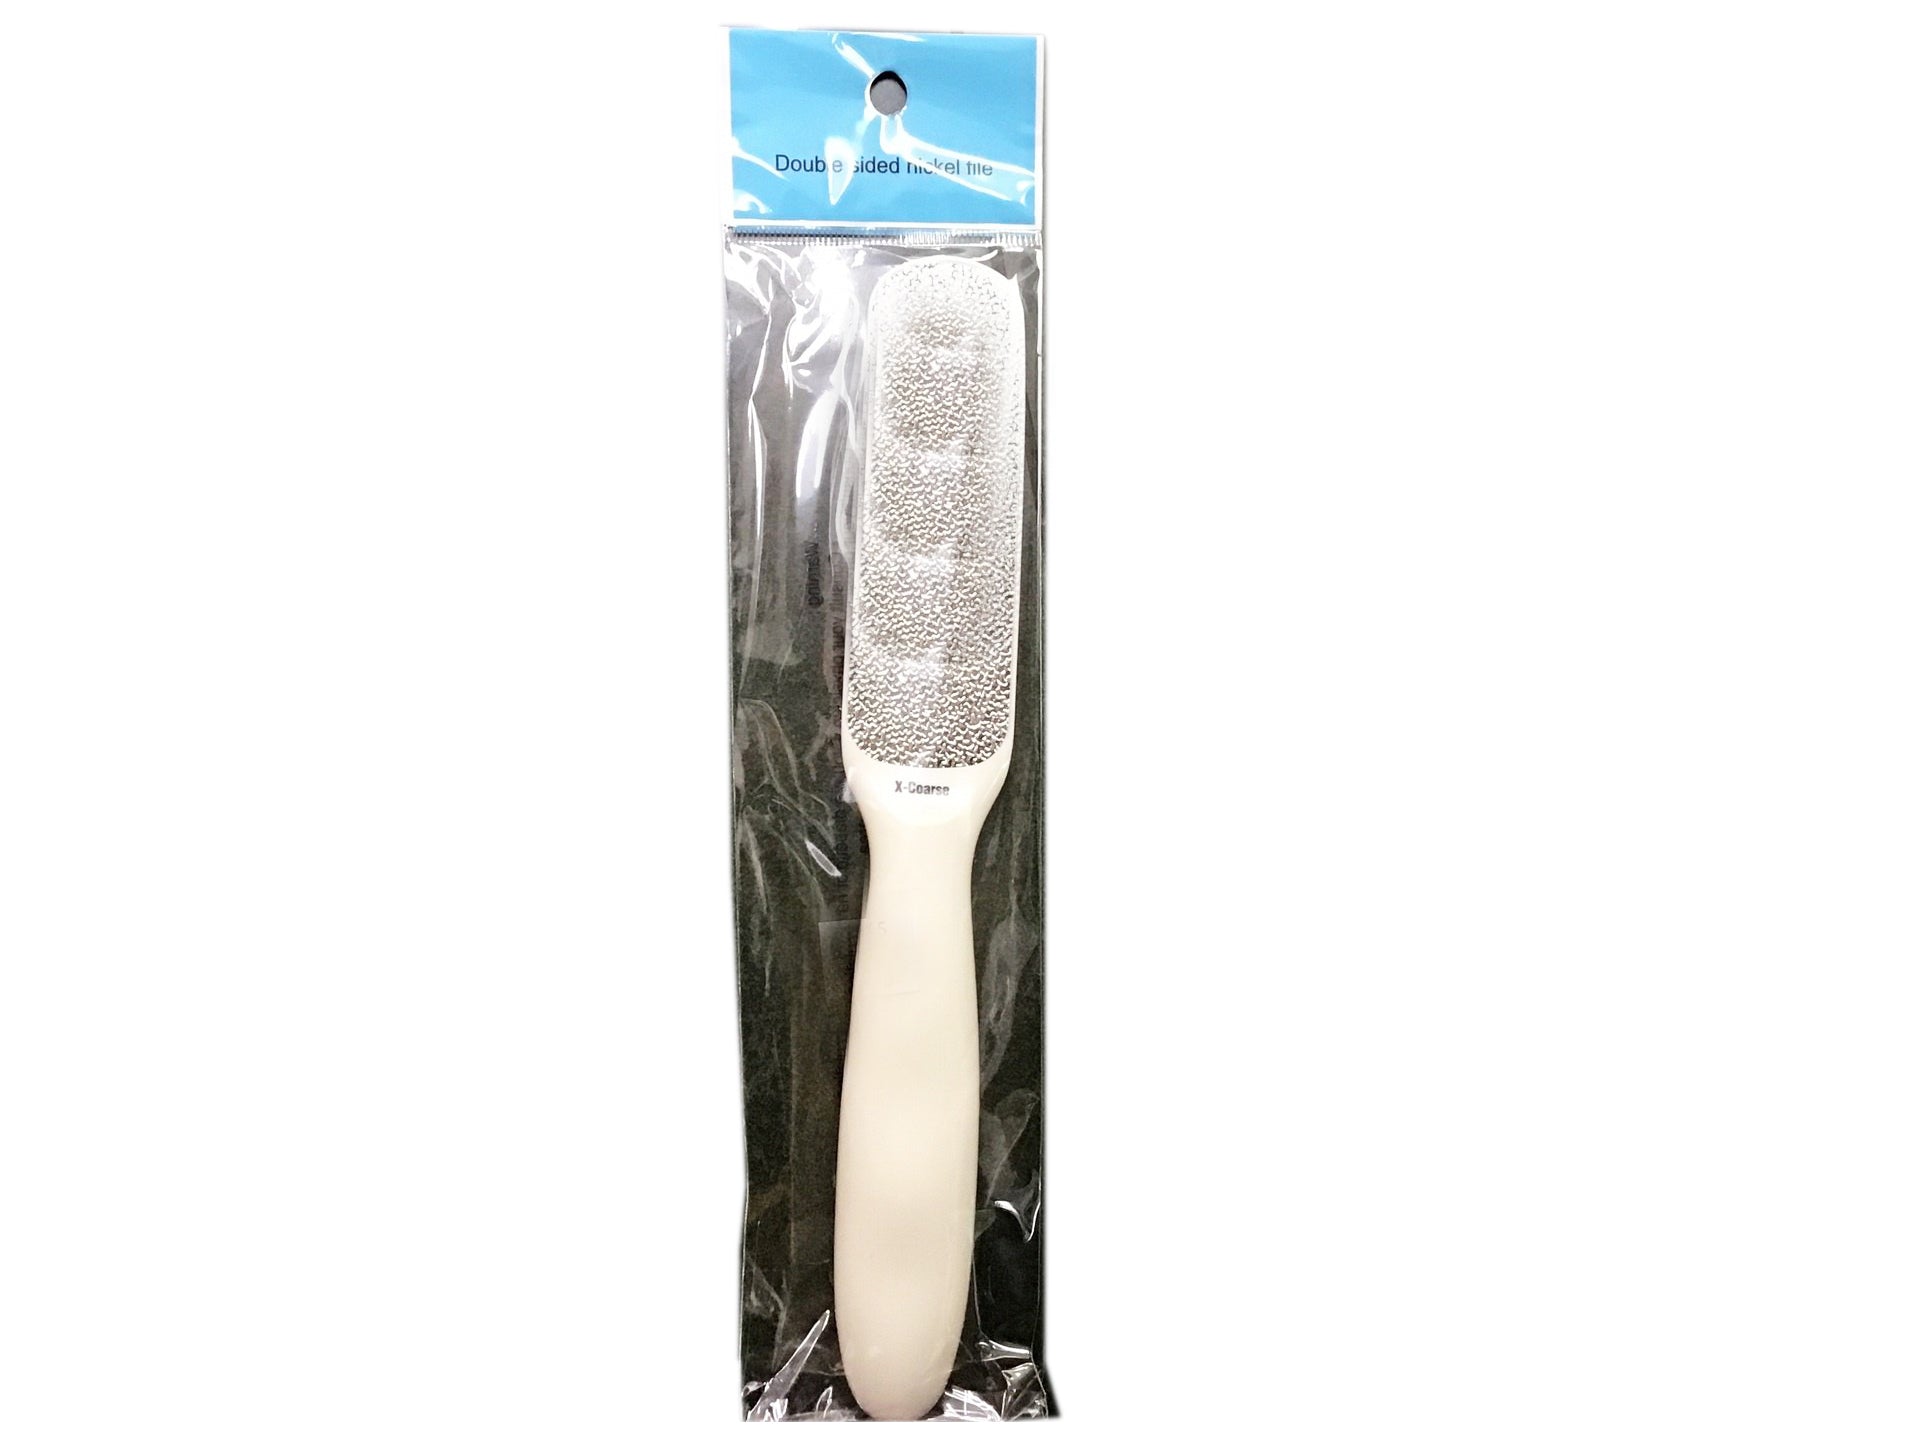 Karlash 2-Sided Hypoallergenic Nickel Foot File for Callus Trimming and Callus Removal, Ivory